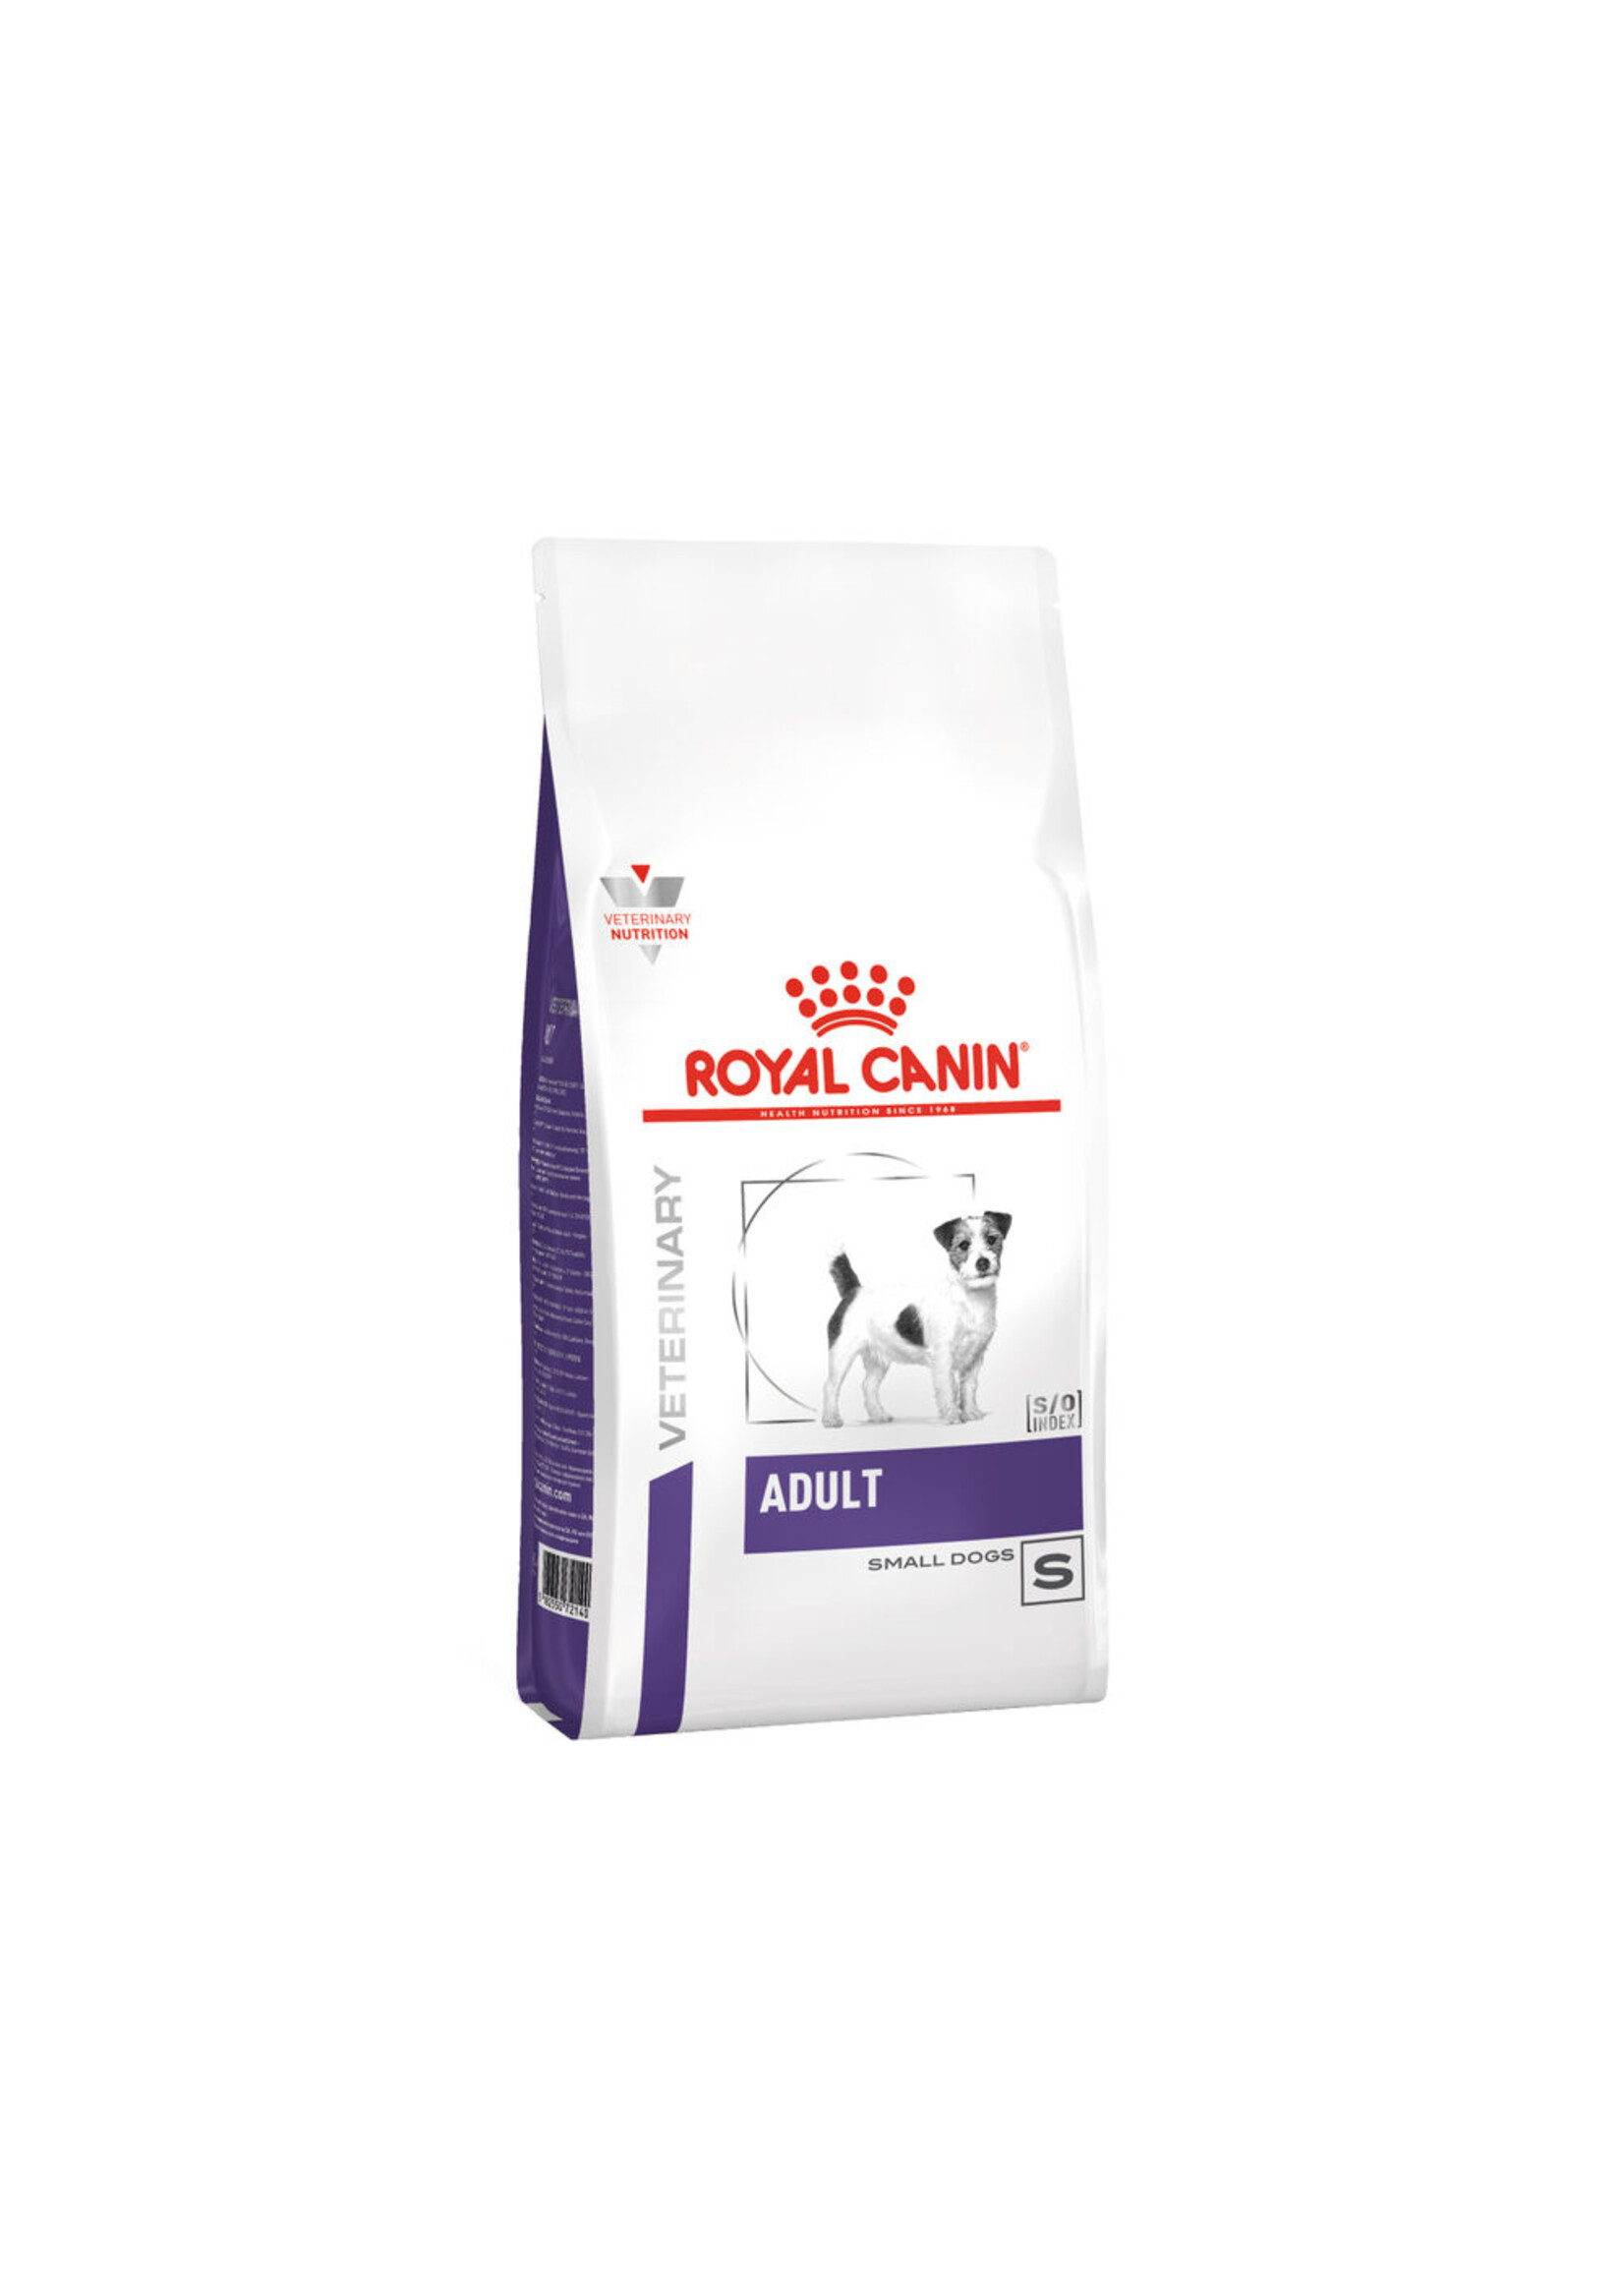 Royal Canin Royal Canin Adult Small Breed Chien (Dental & Digest) 4kg